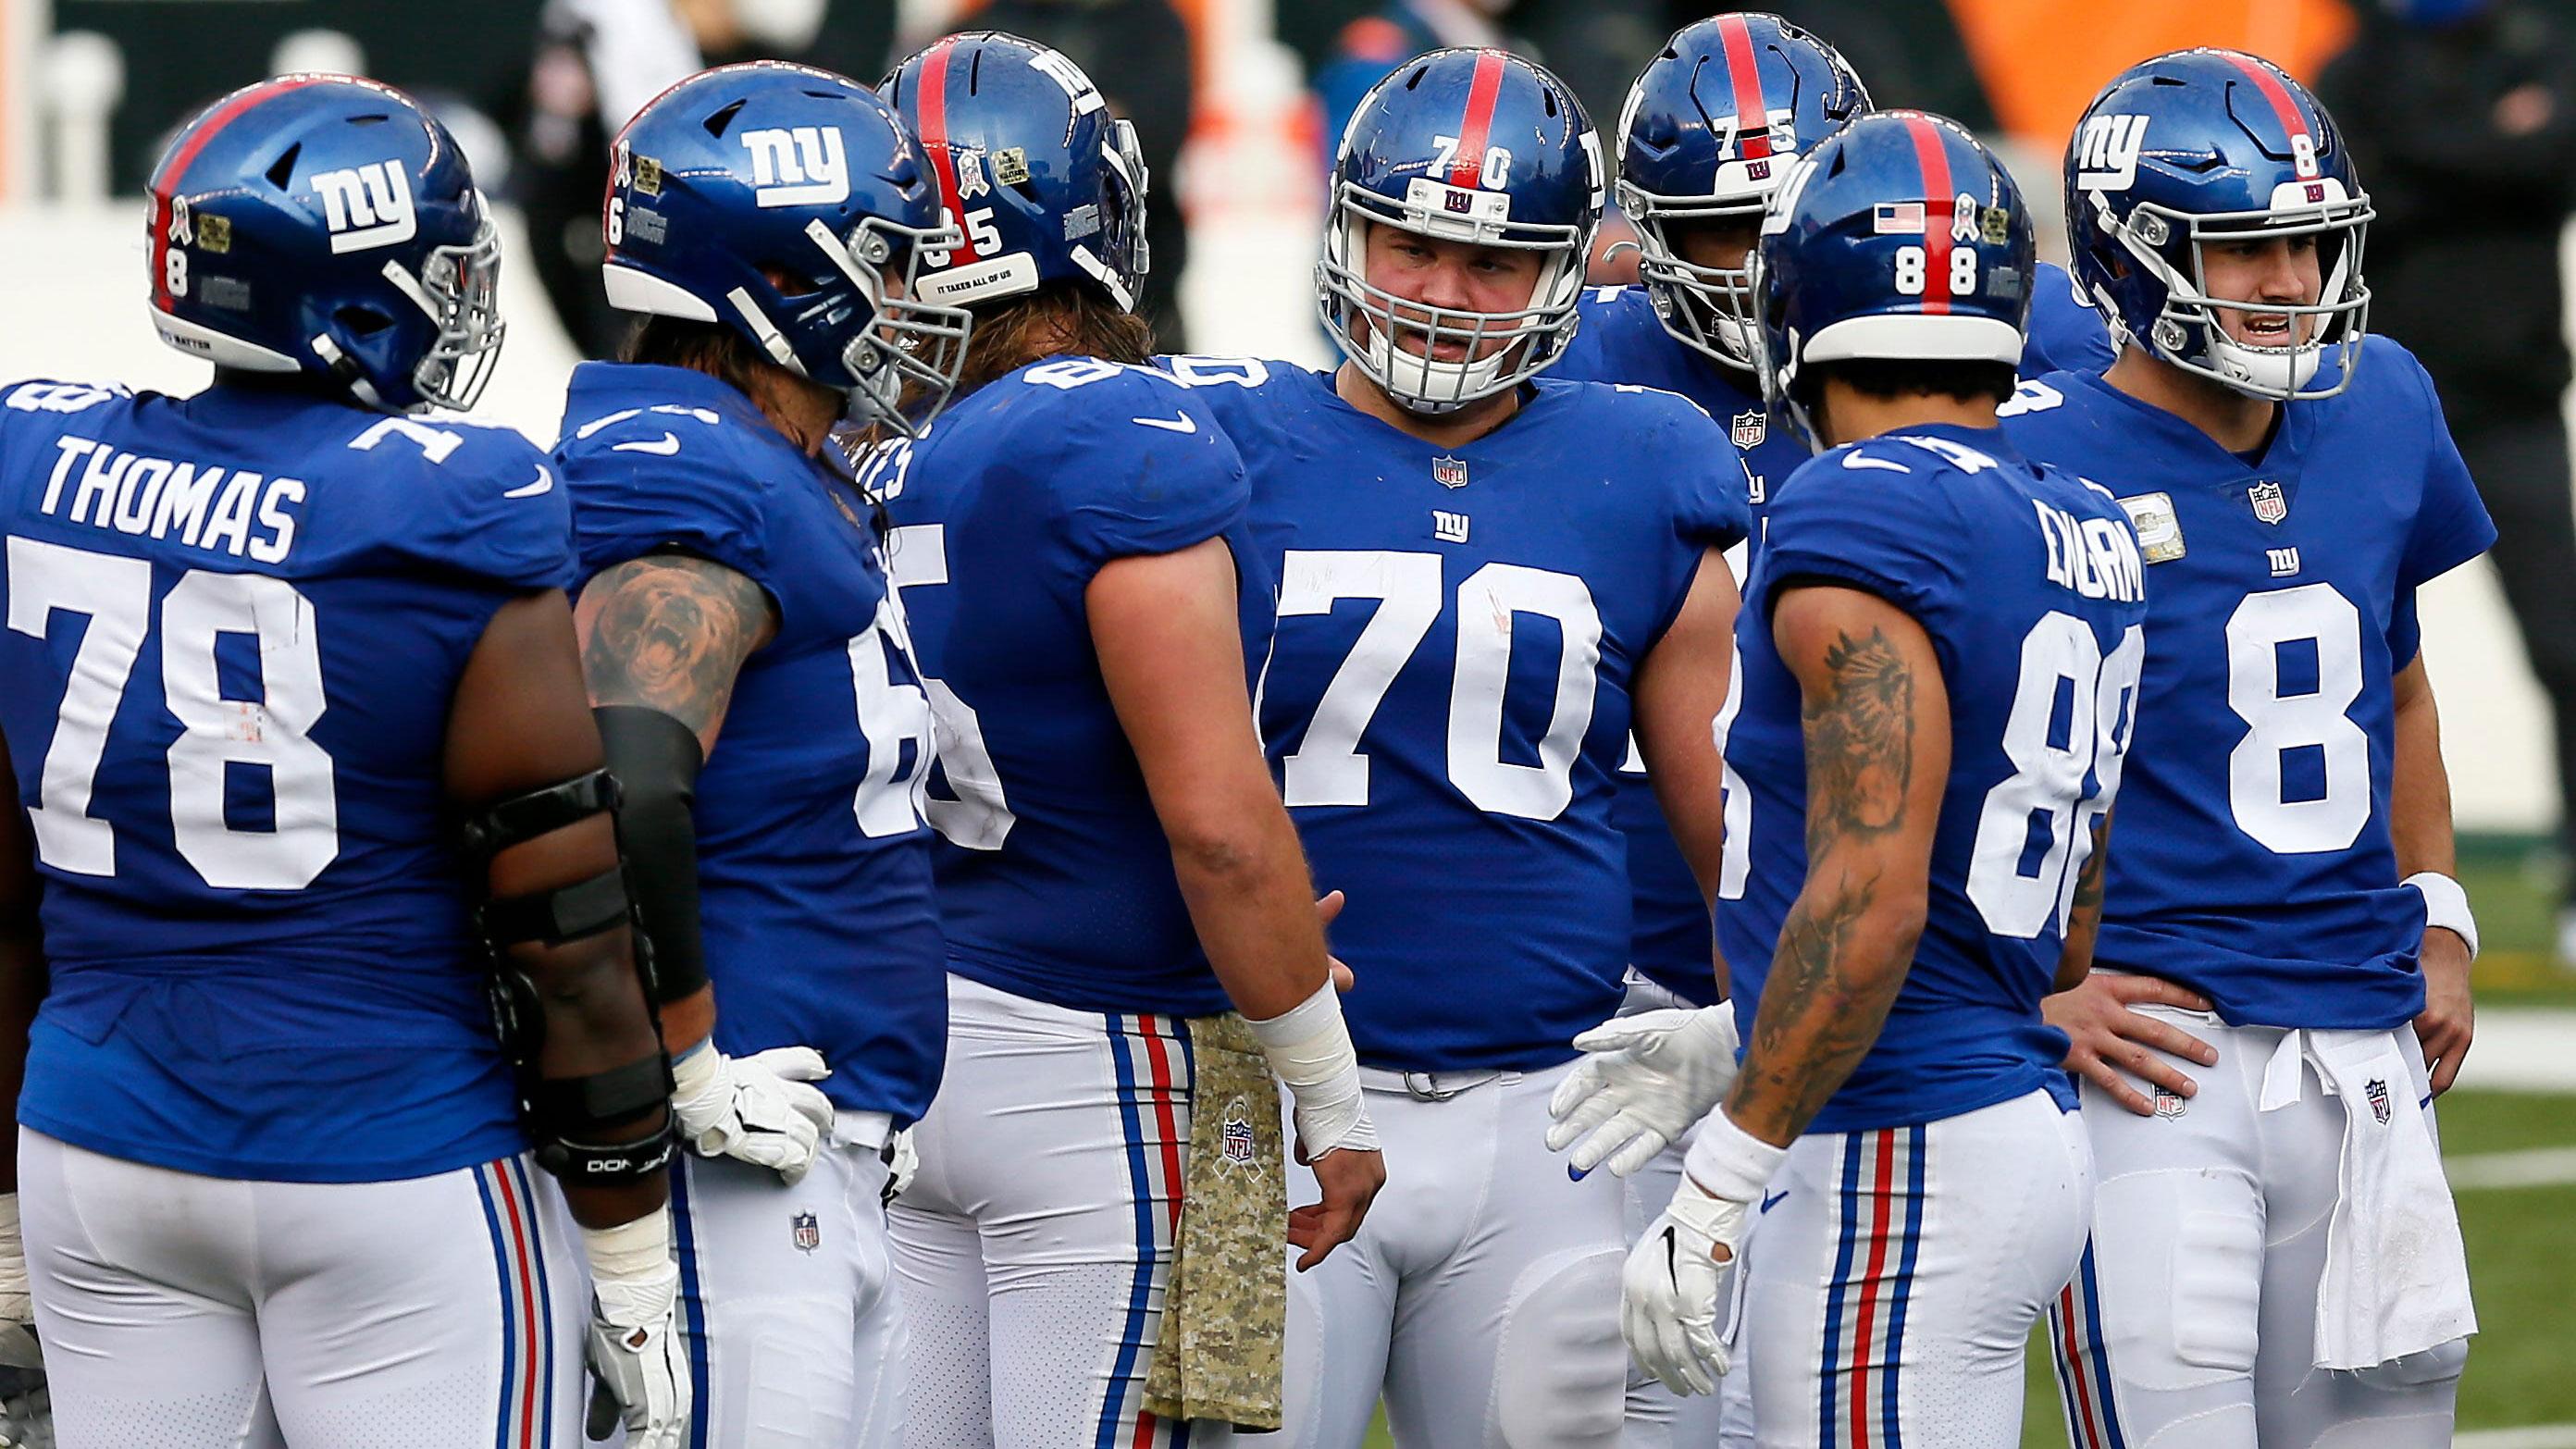 New York Giants offensive guard Kevin Zeitler (70) talks n the huddle before a play in the second quarter of the NFL Week 12 game between the Cincinnati Bengals and the New York Giants at Paul Brown Stadium in Cincinnati on Sunday, Nov. 29, 2020. The game was tied at 10 going into halftime. New York Giants At Cincinnati Bengals / Sam Greene via Imagn Content Services, LLC